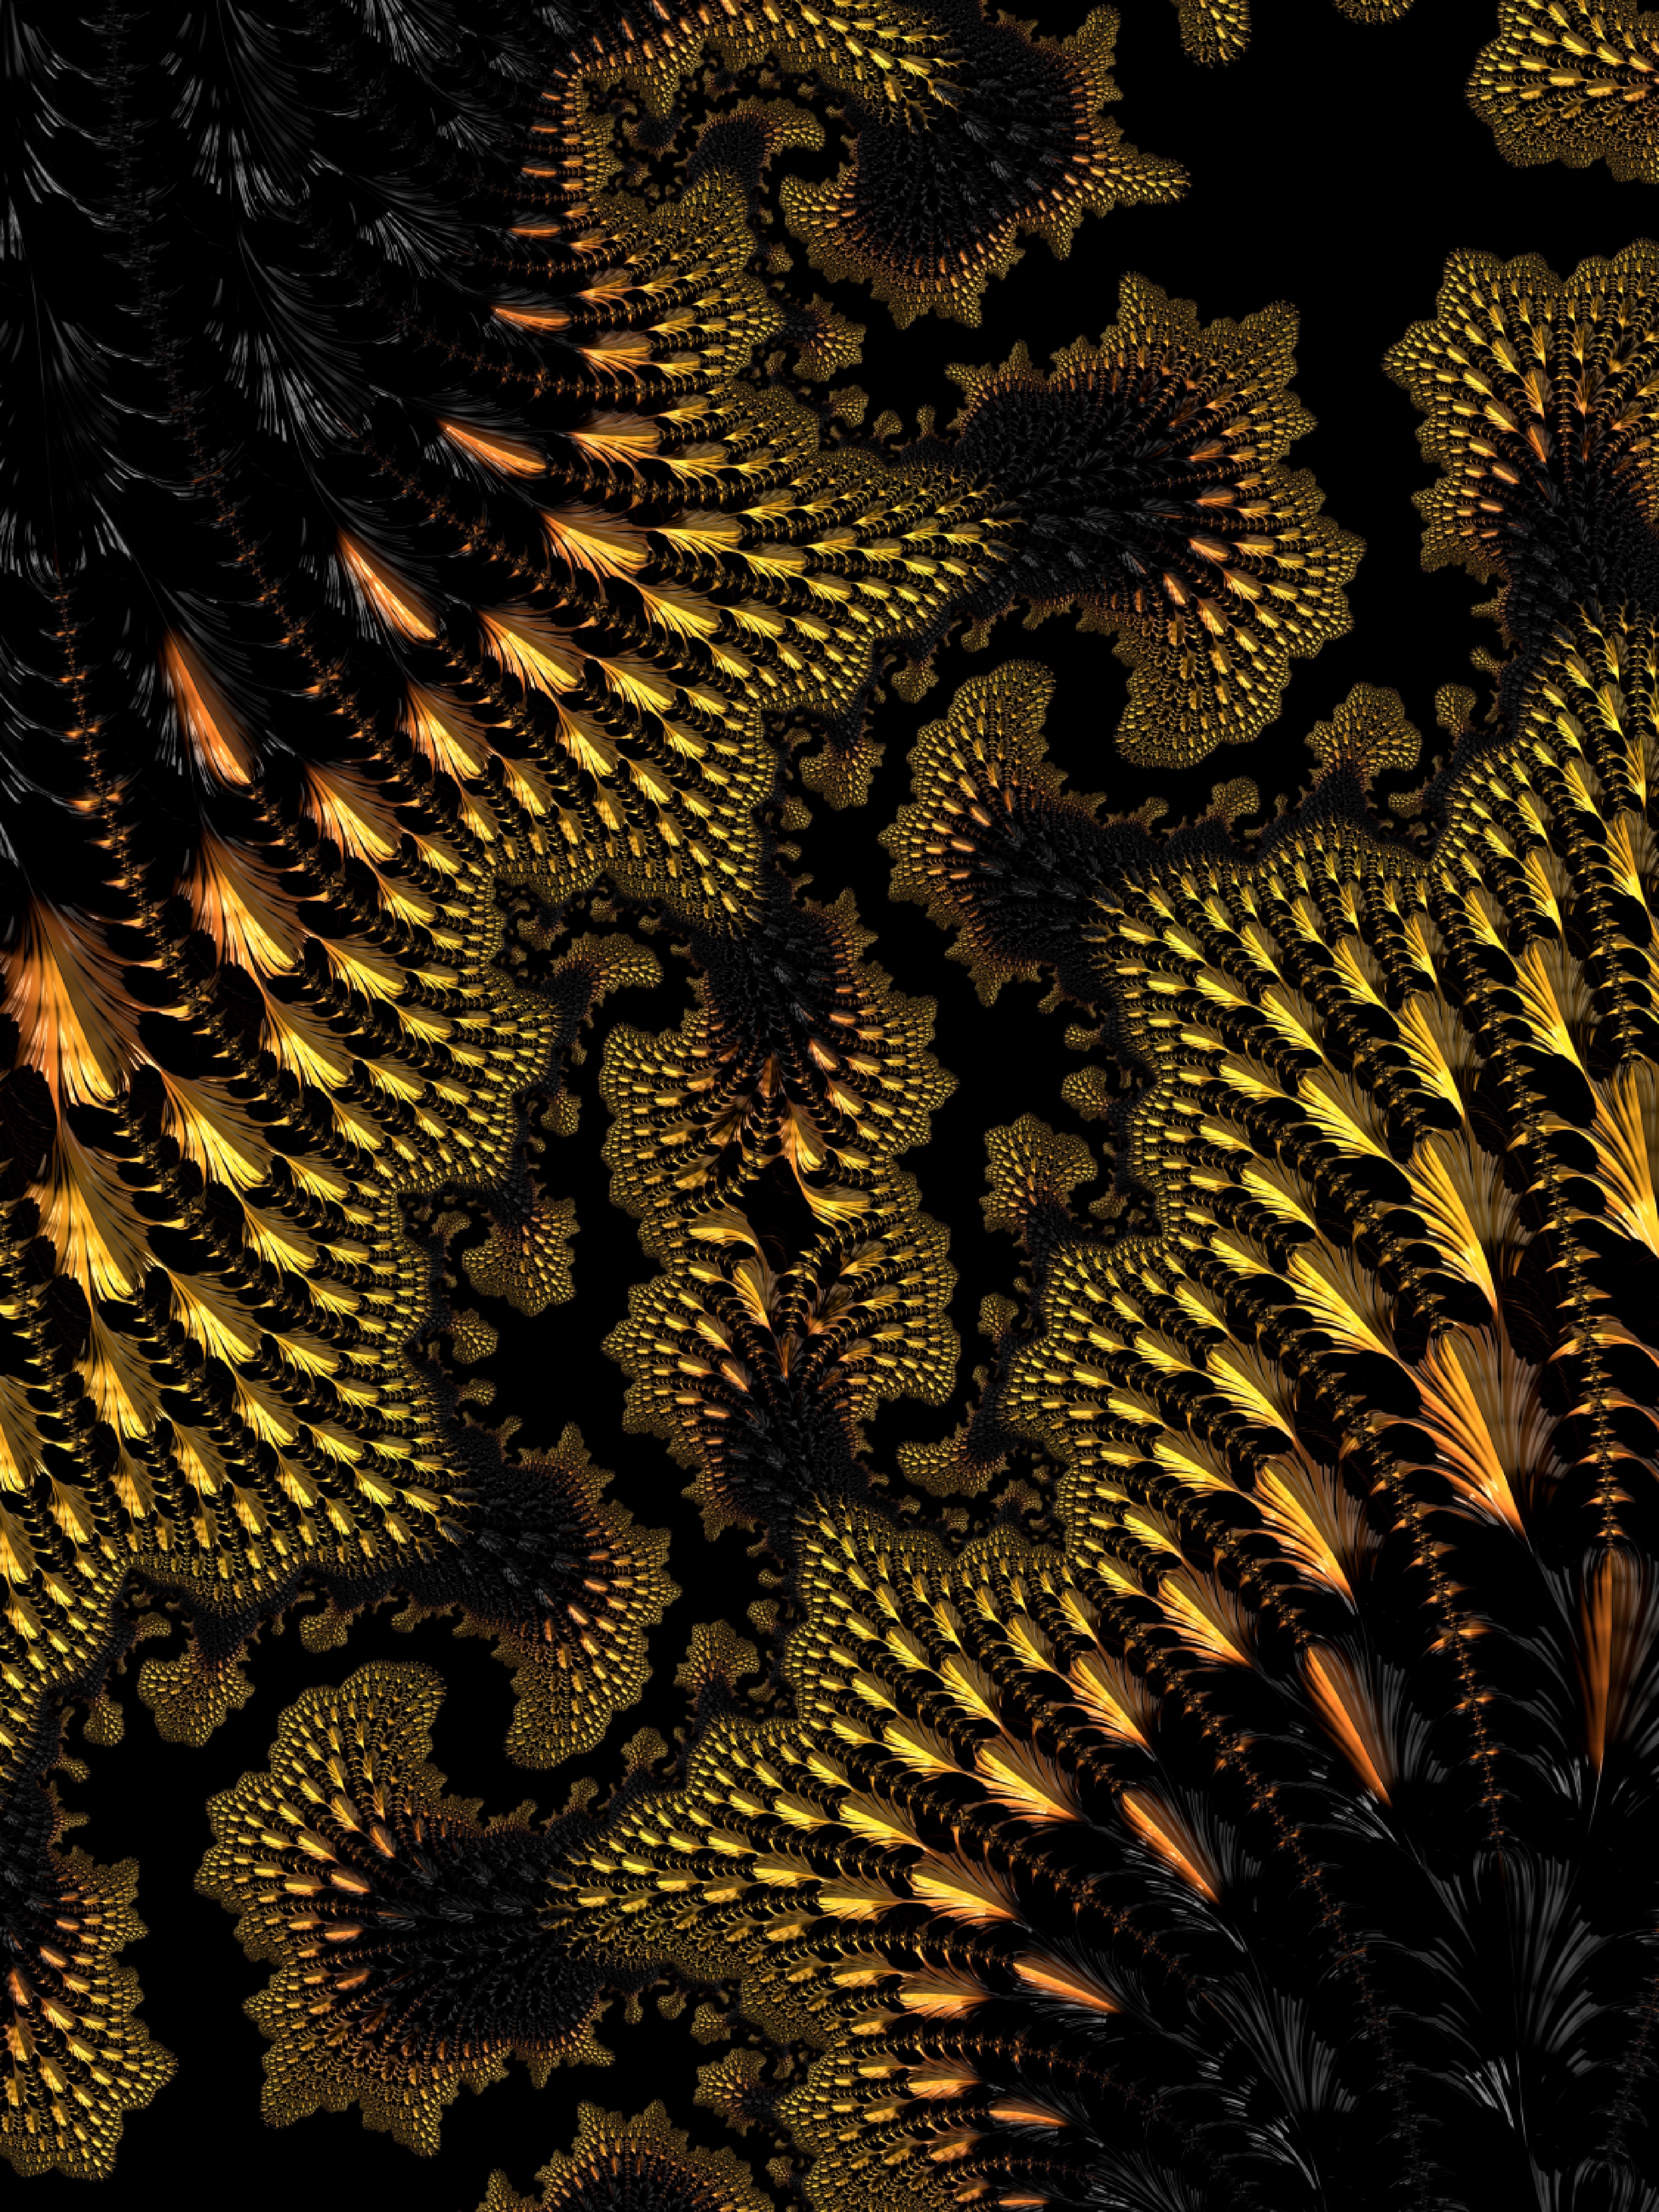 fractal, 3d, abstract, black, yellow, winding, sinuous, ornate cellphone